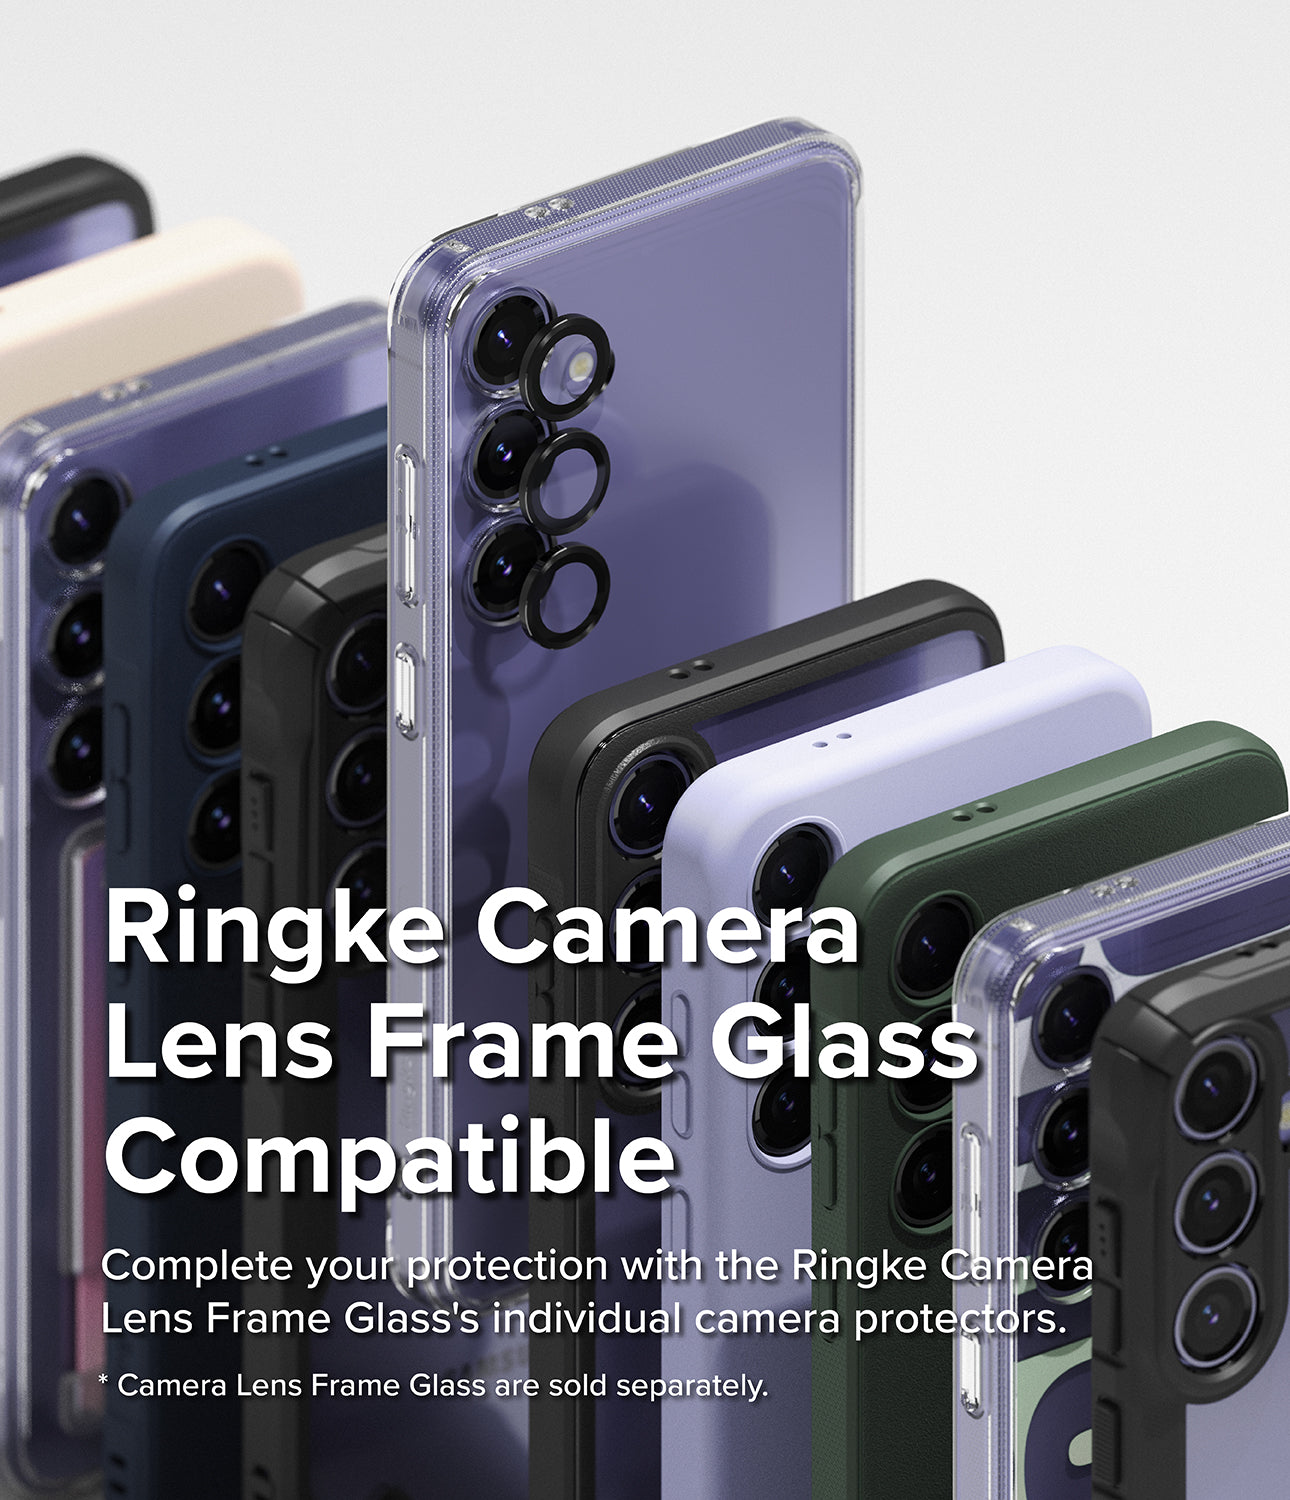 Galaxy S24 Plus Case | Onyx - Navy - Ringke Camera Lens Frame Glass Compatible. Complete your protection with the Ringke Camera Lens Frame Glass' individual camera protectors